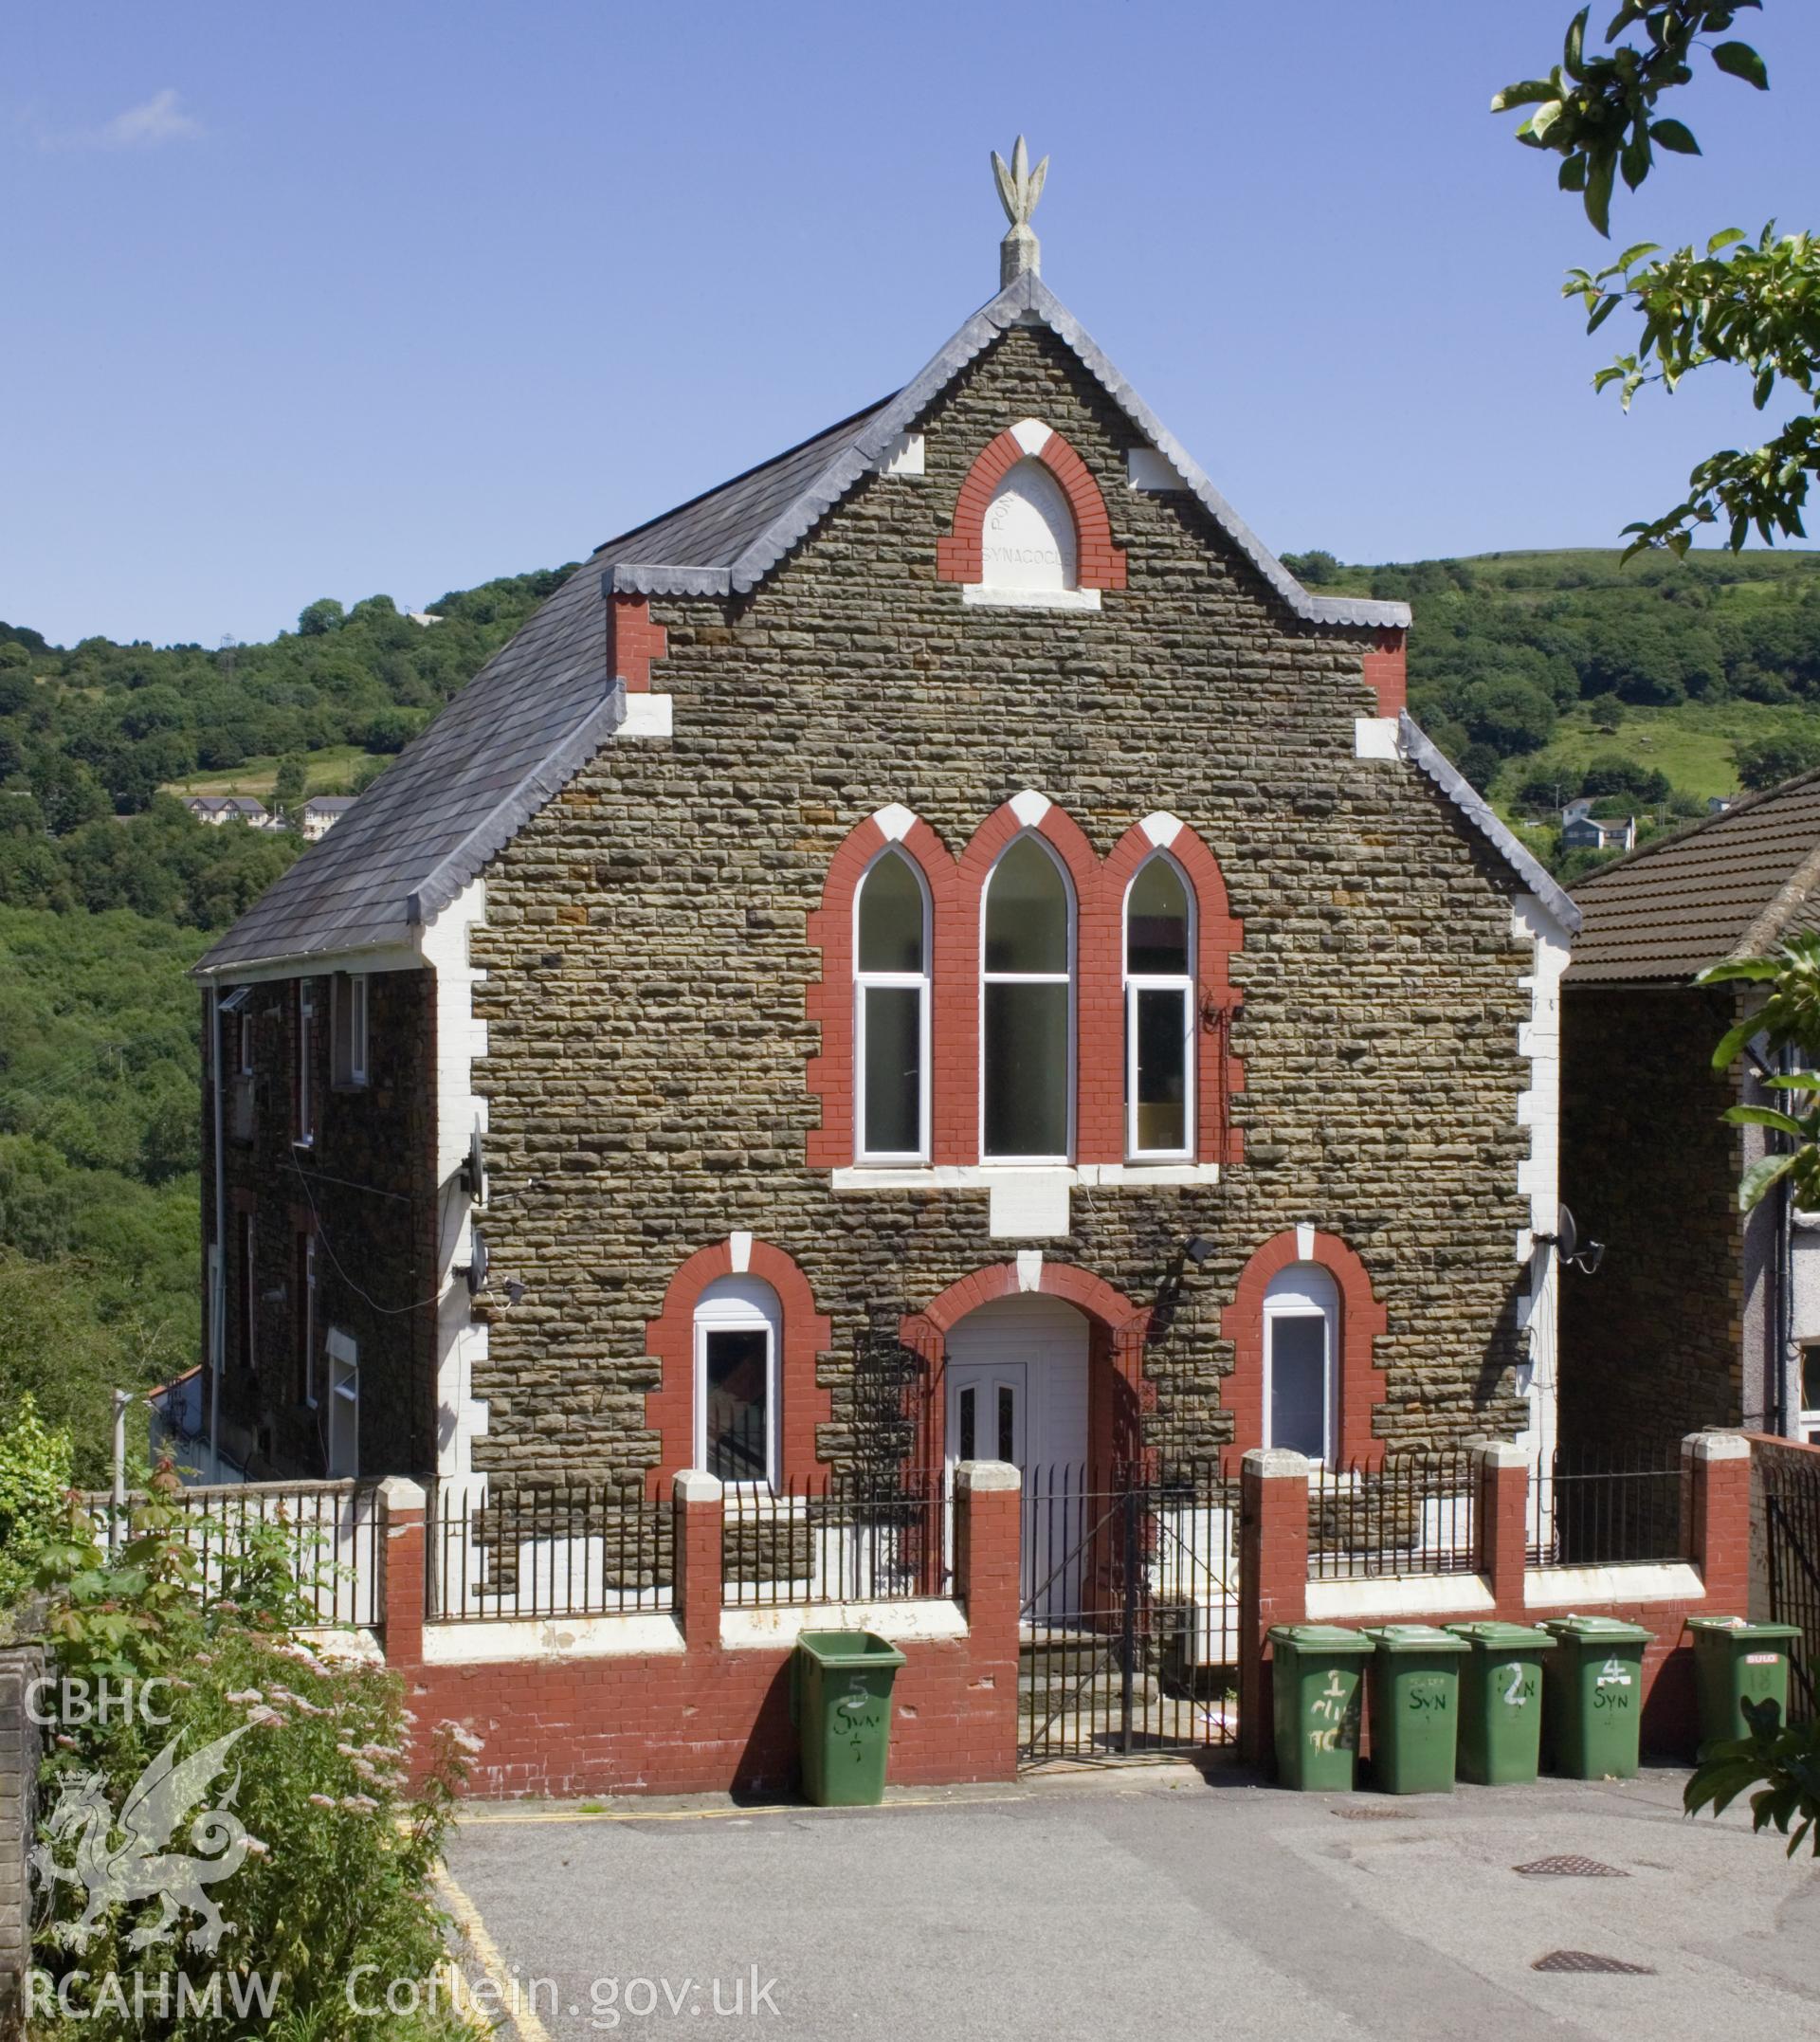 Pontypridd synagogue opened in 1895. The building is marked on OS 2nd edition mapping as 'synagogue' and is thought to have been purpose built. The synagogue closed in 1978 and the building has been converted to private domestic use.